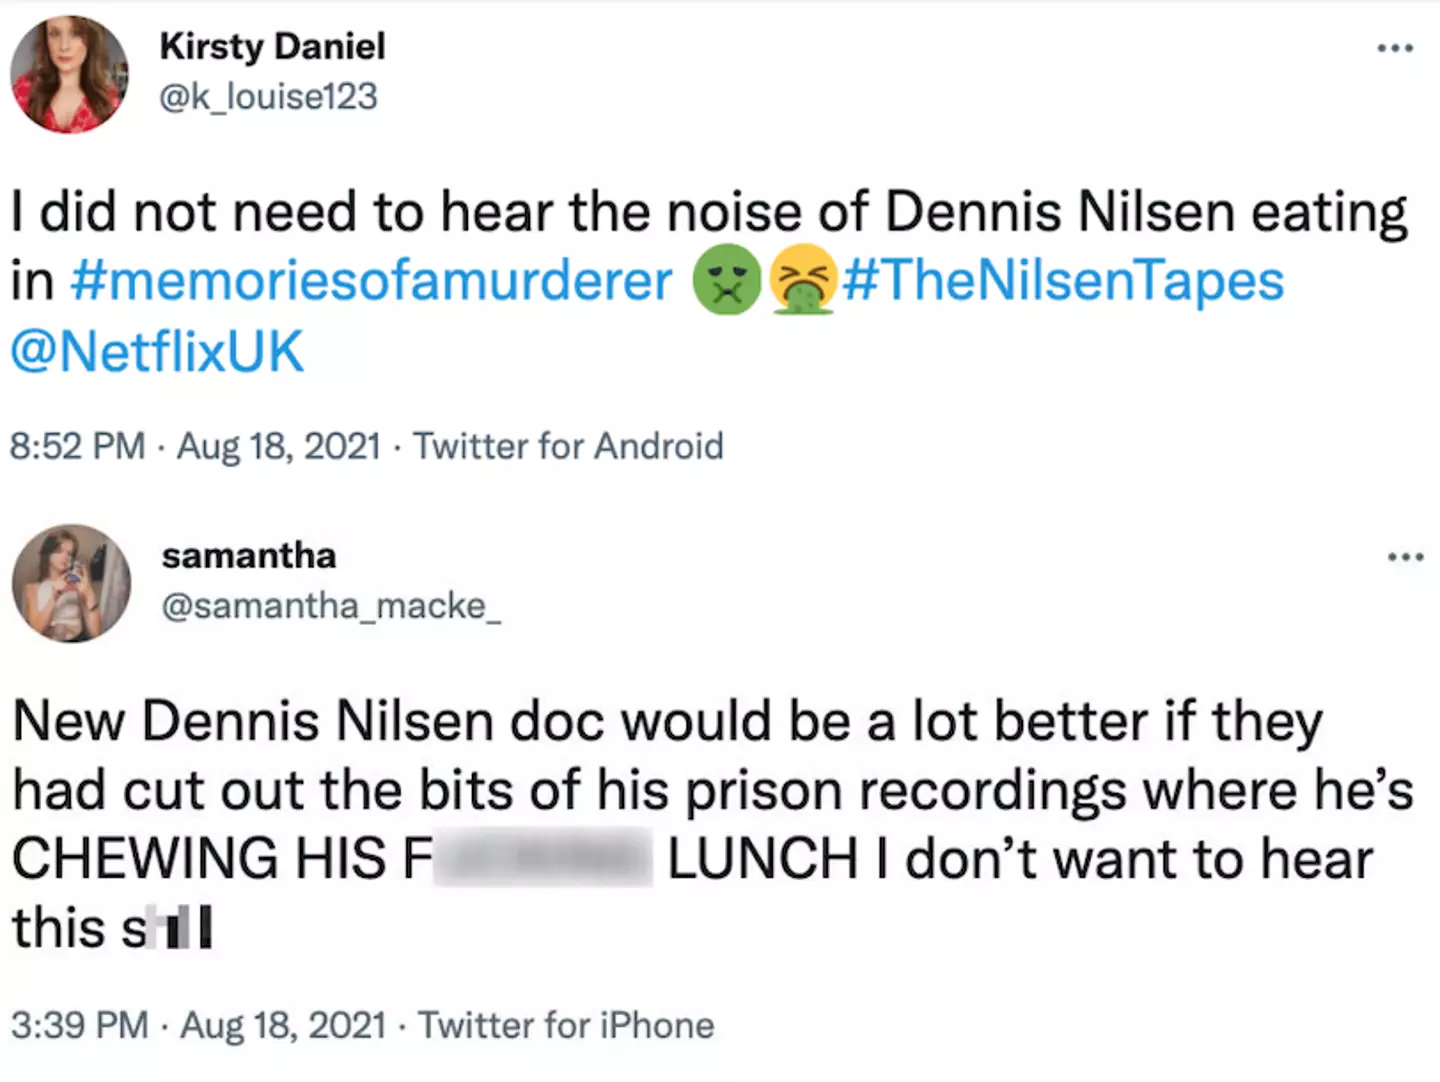 Viewers were creeped out after hearing Dennis Nilsen chewing his lunch (